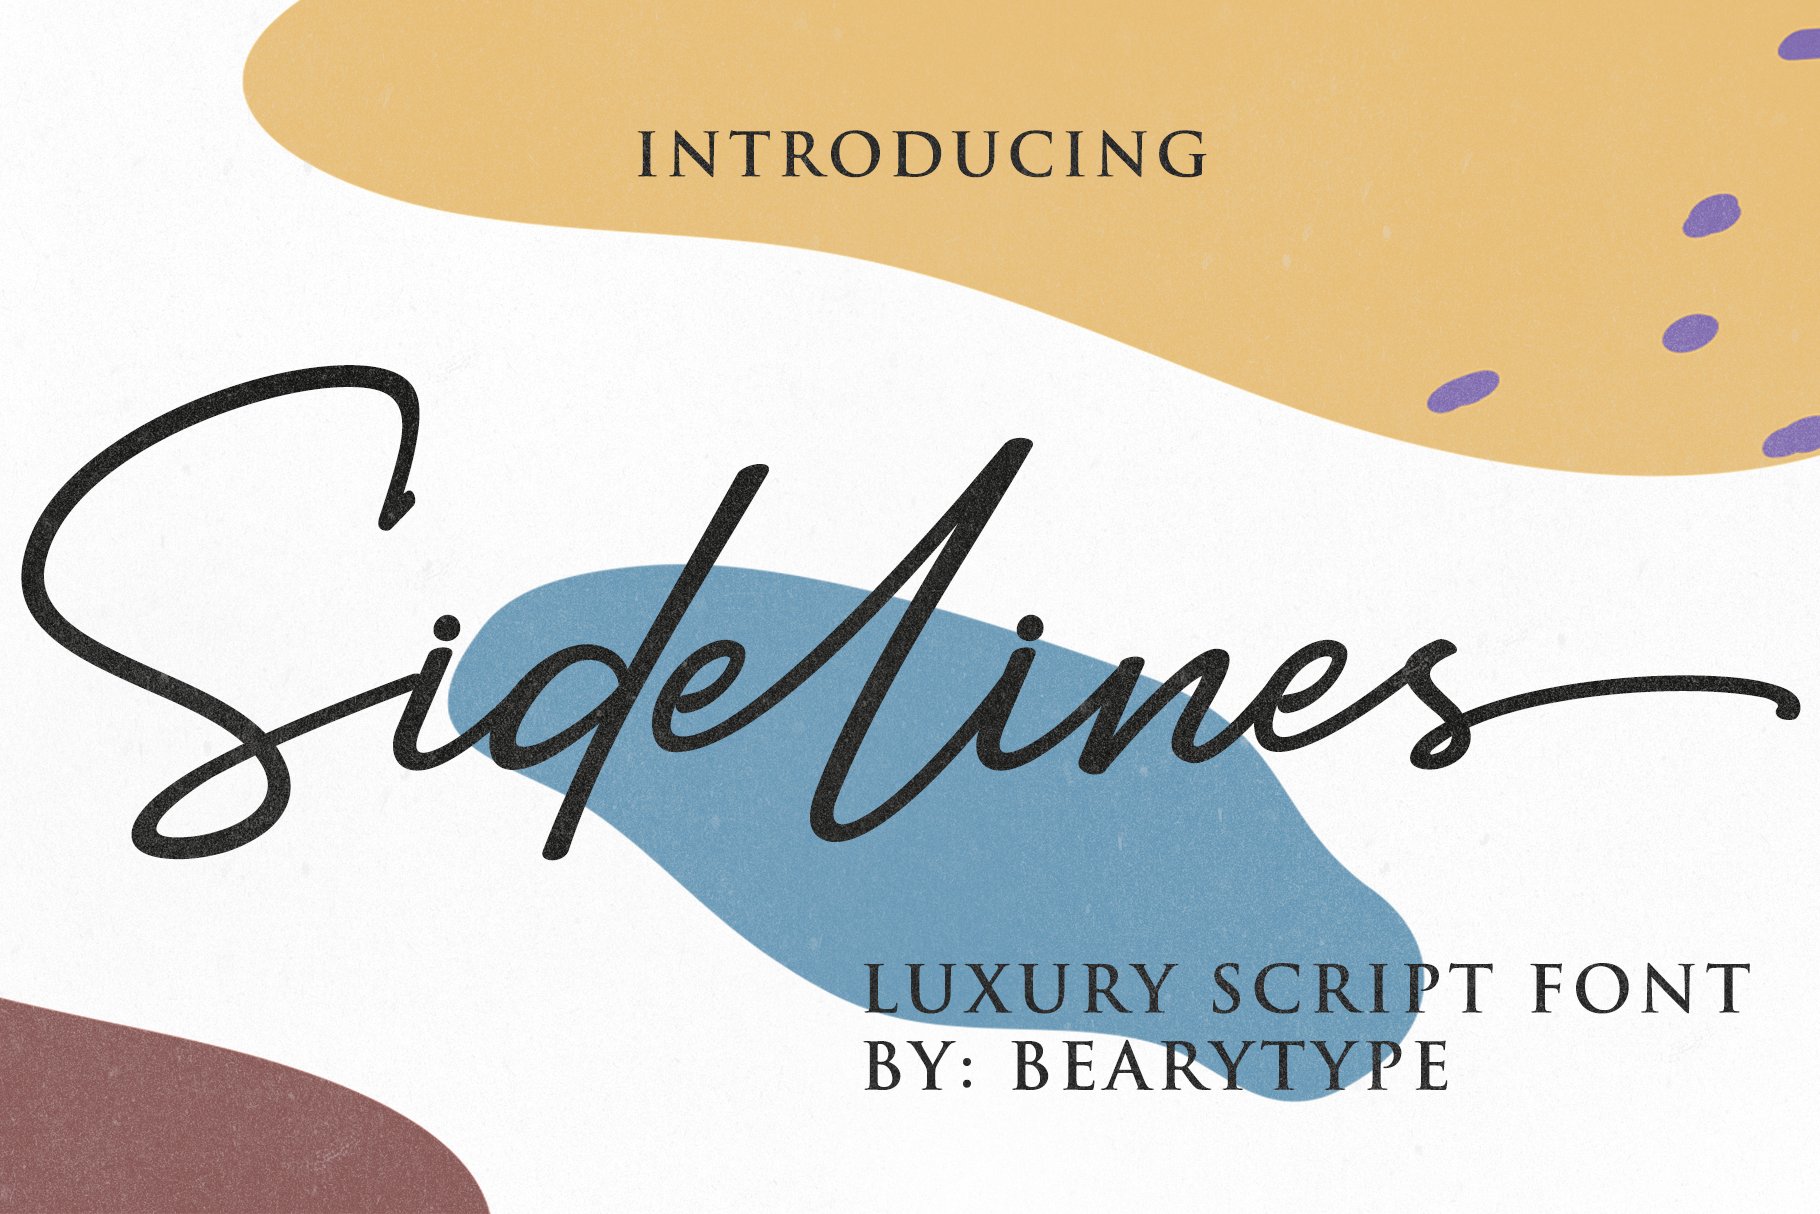 Sidelines // Luxury Signature Font cover image.